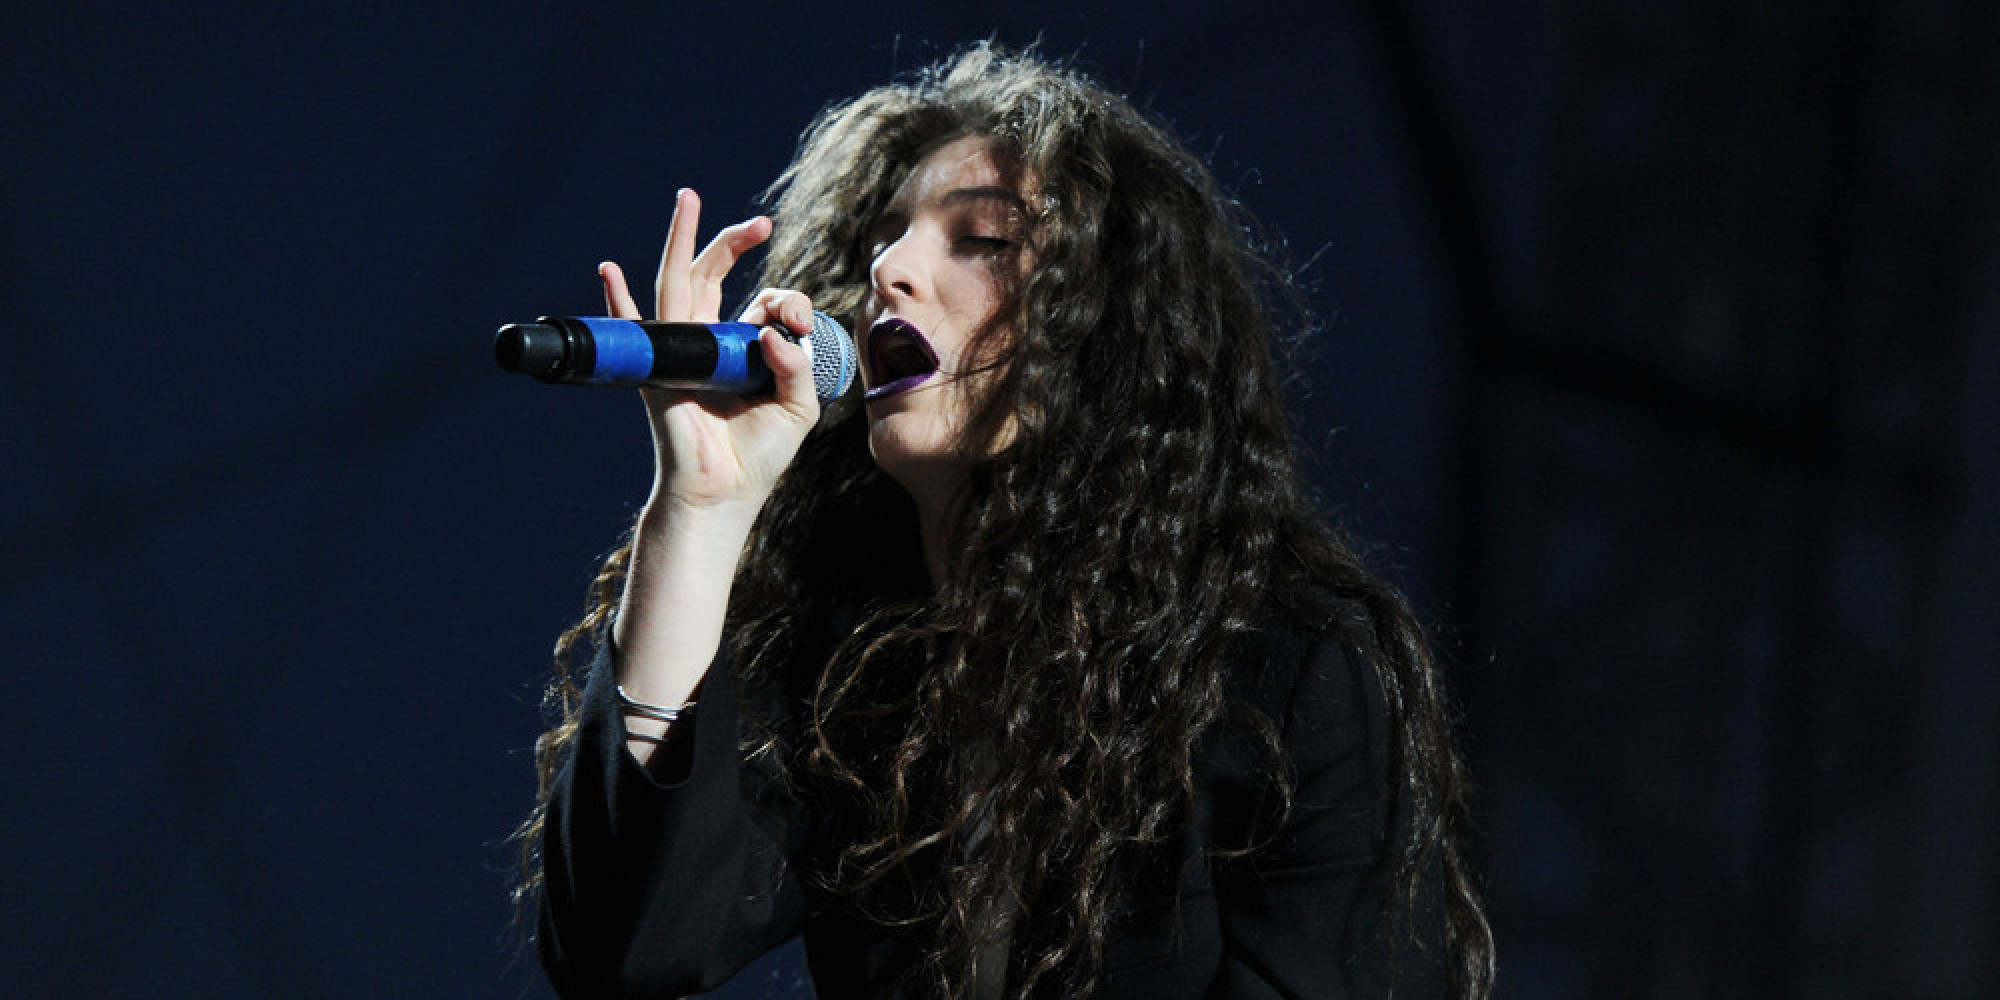 Flume Drops Trippy Remix Of Lorde #39 s #39 Tennis Court #39 HuffPost